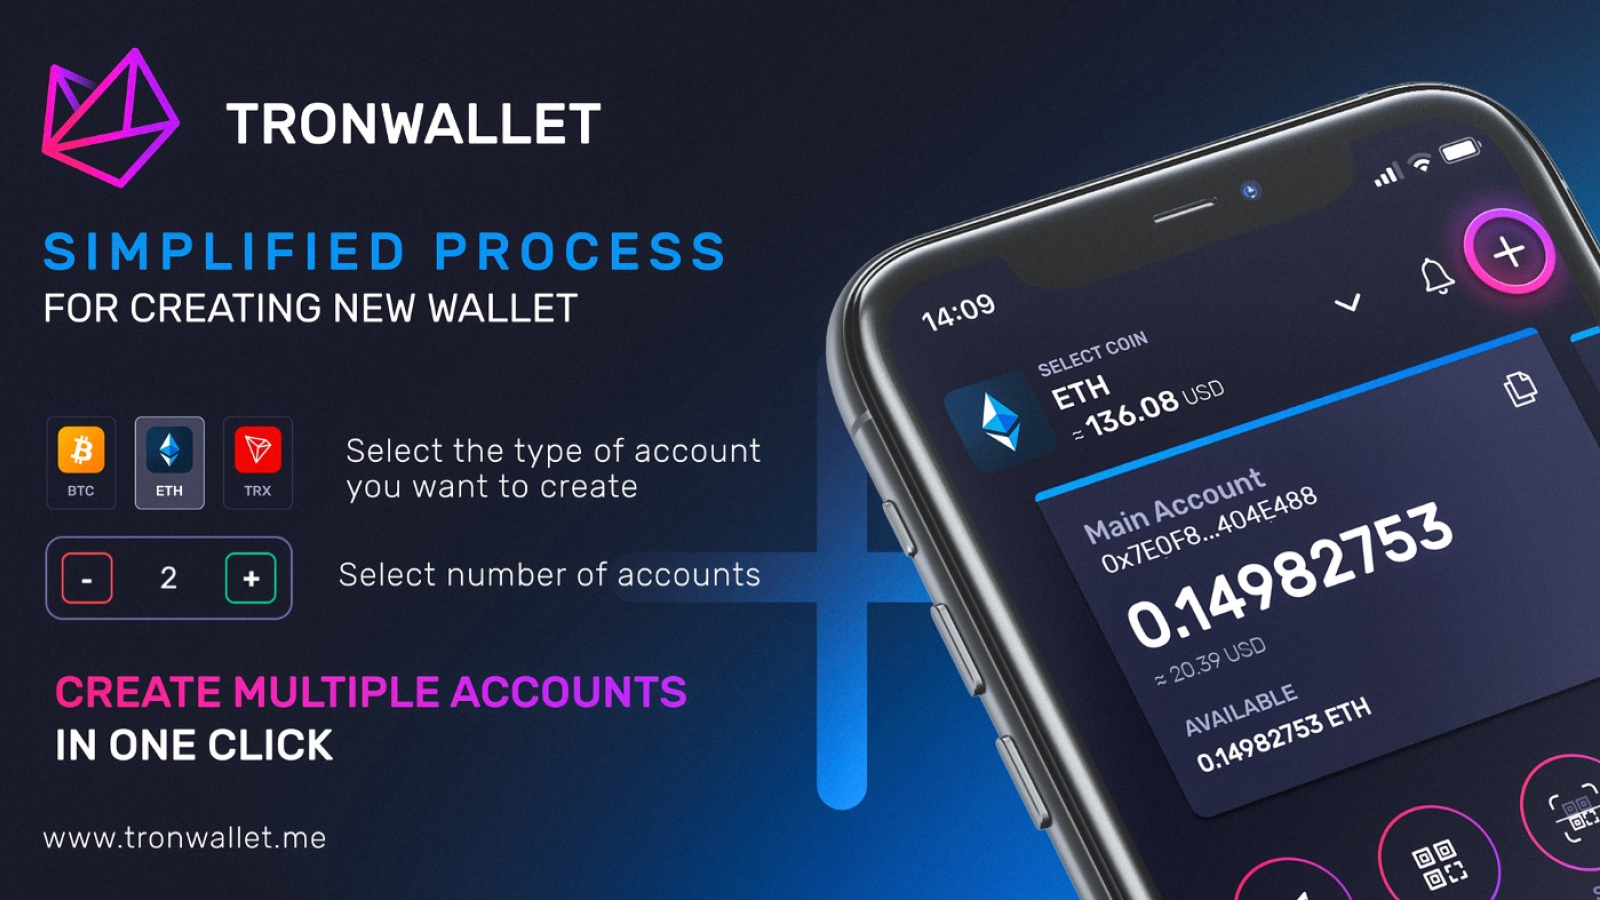 Multiple accounts creation is enabled in new TronWallet release